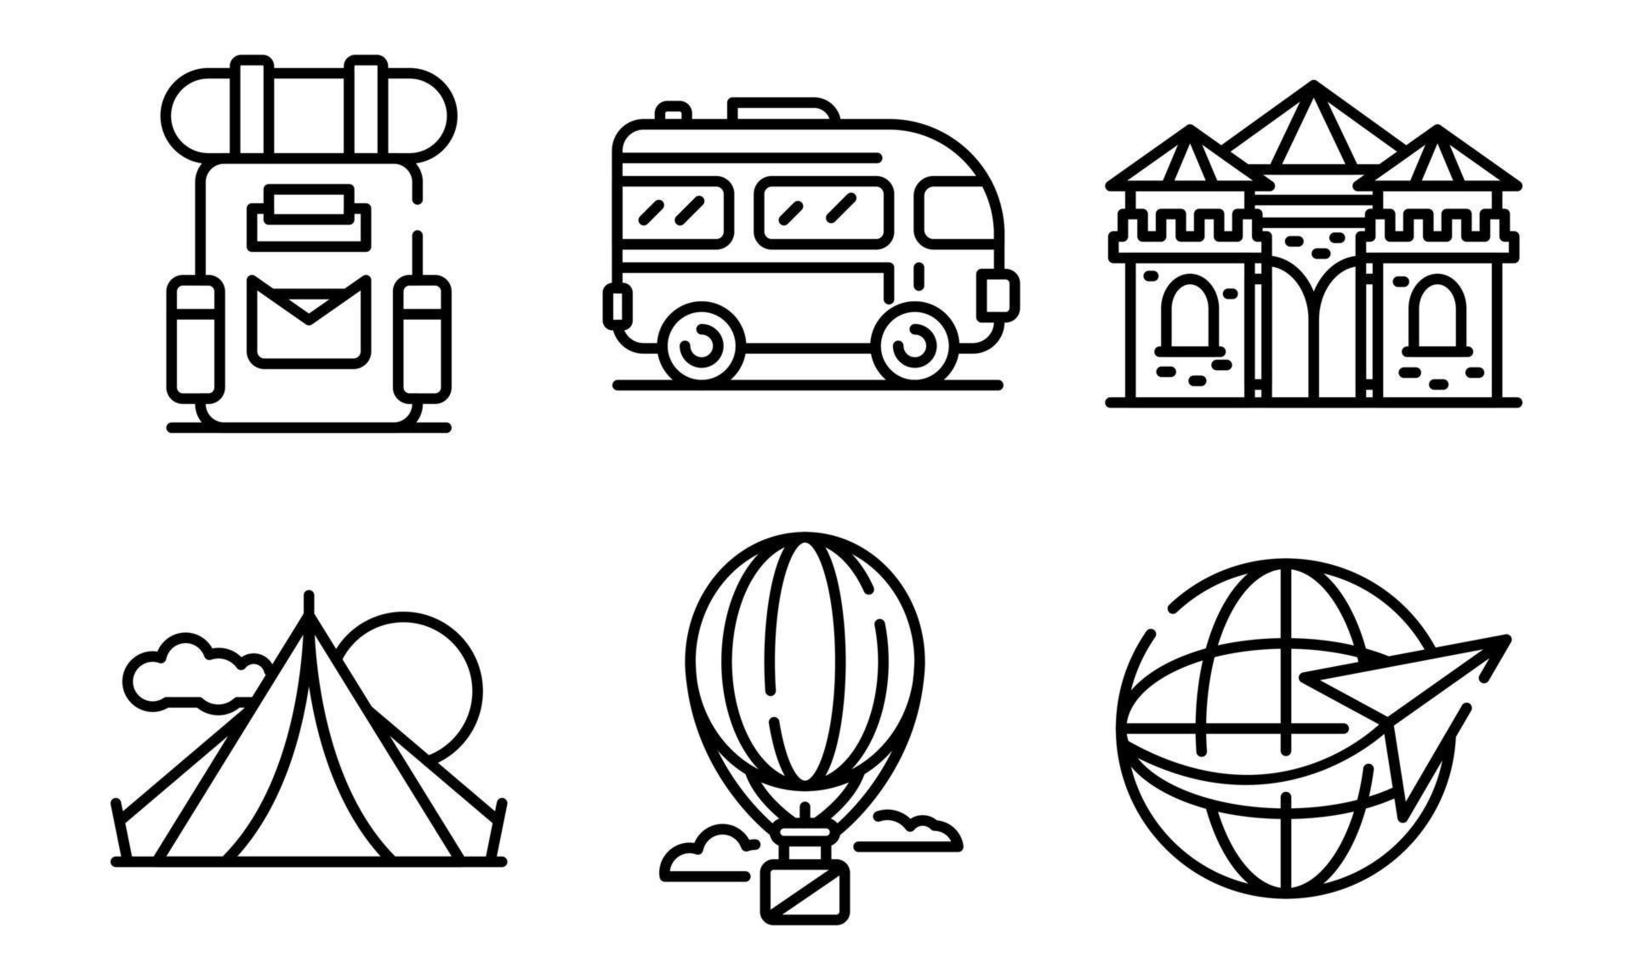 Excursion icons set, outline style vector